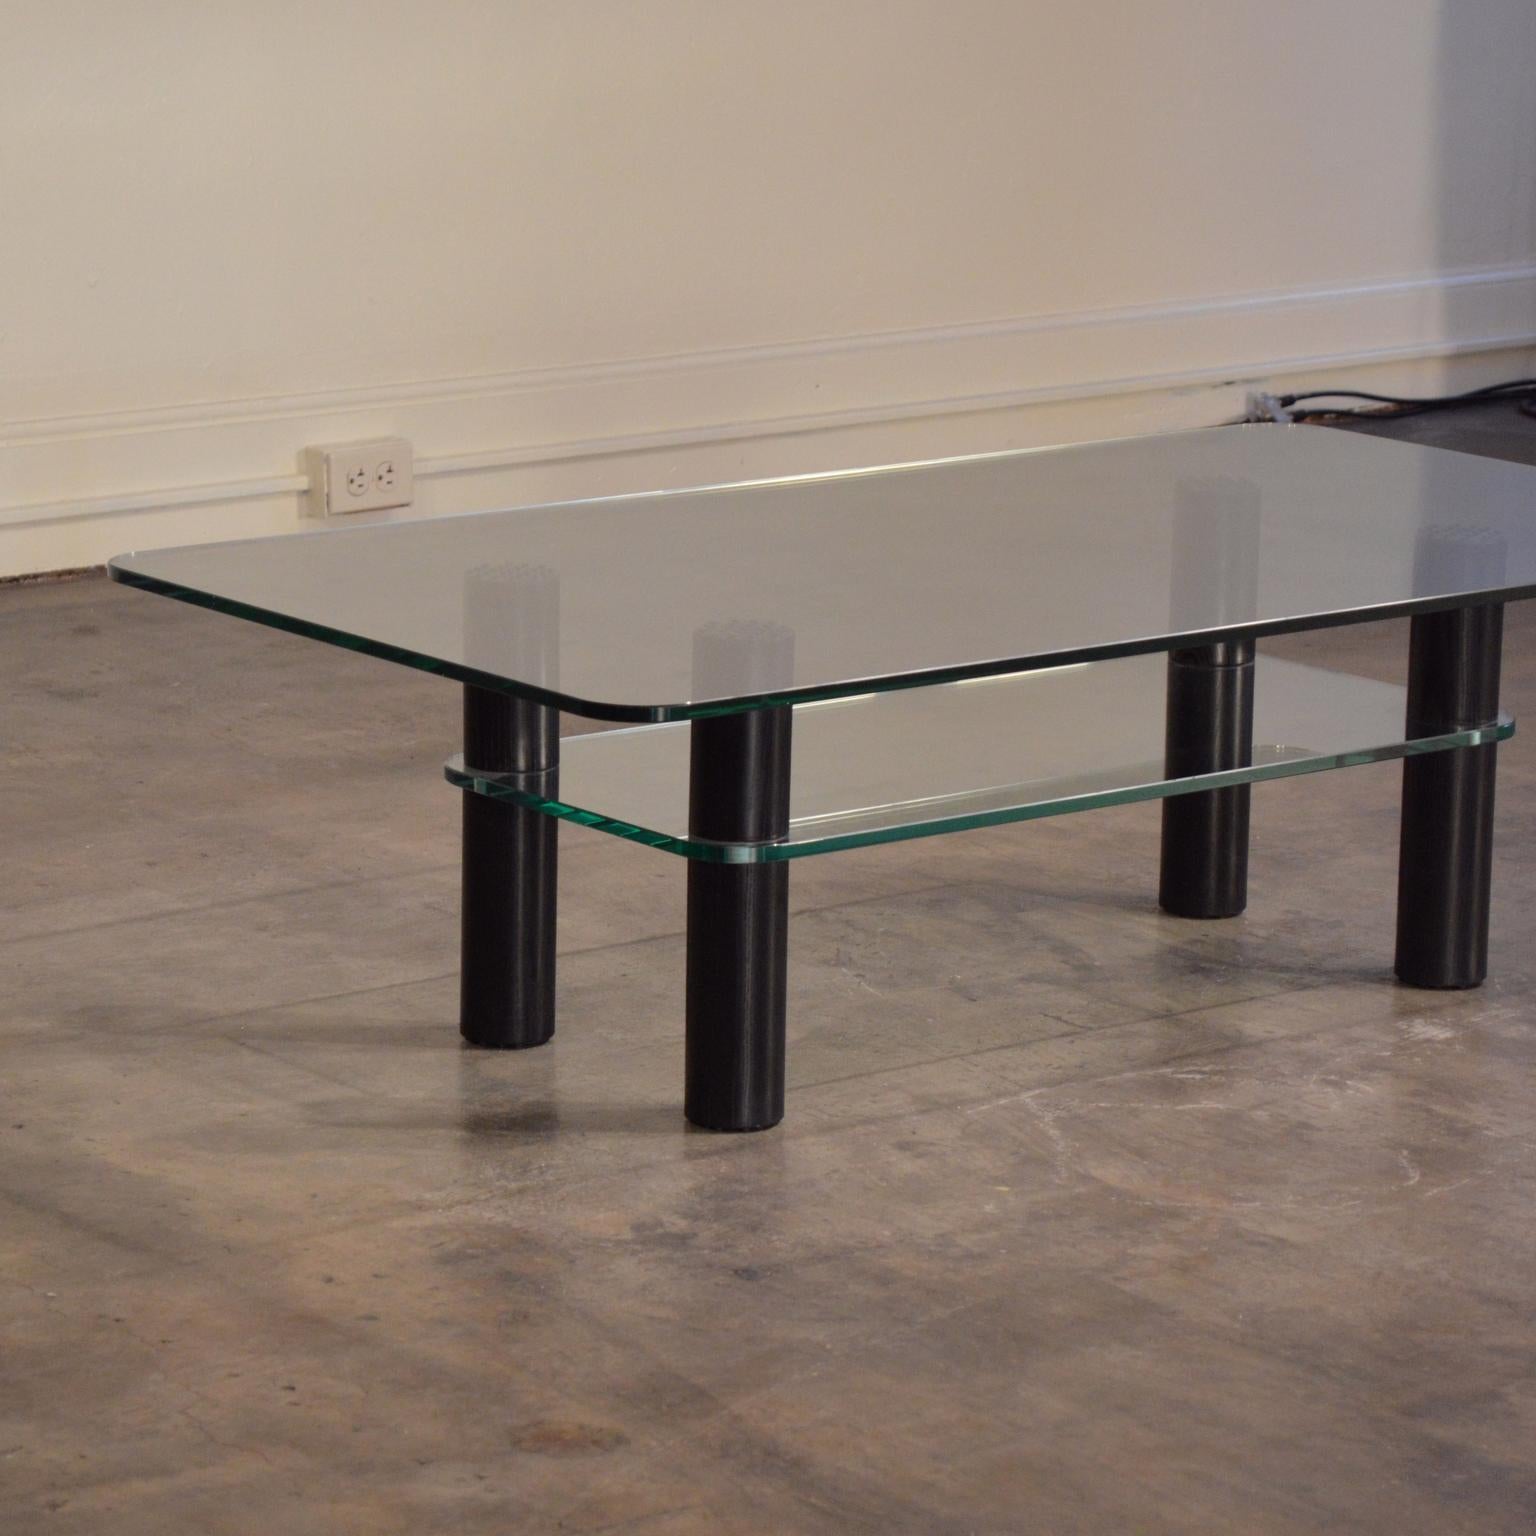 Alessi Post-Modern Glass, Wood, and Rubber Coffee Table c. 1980's For Sale 4